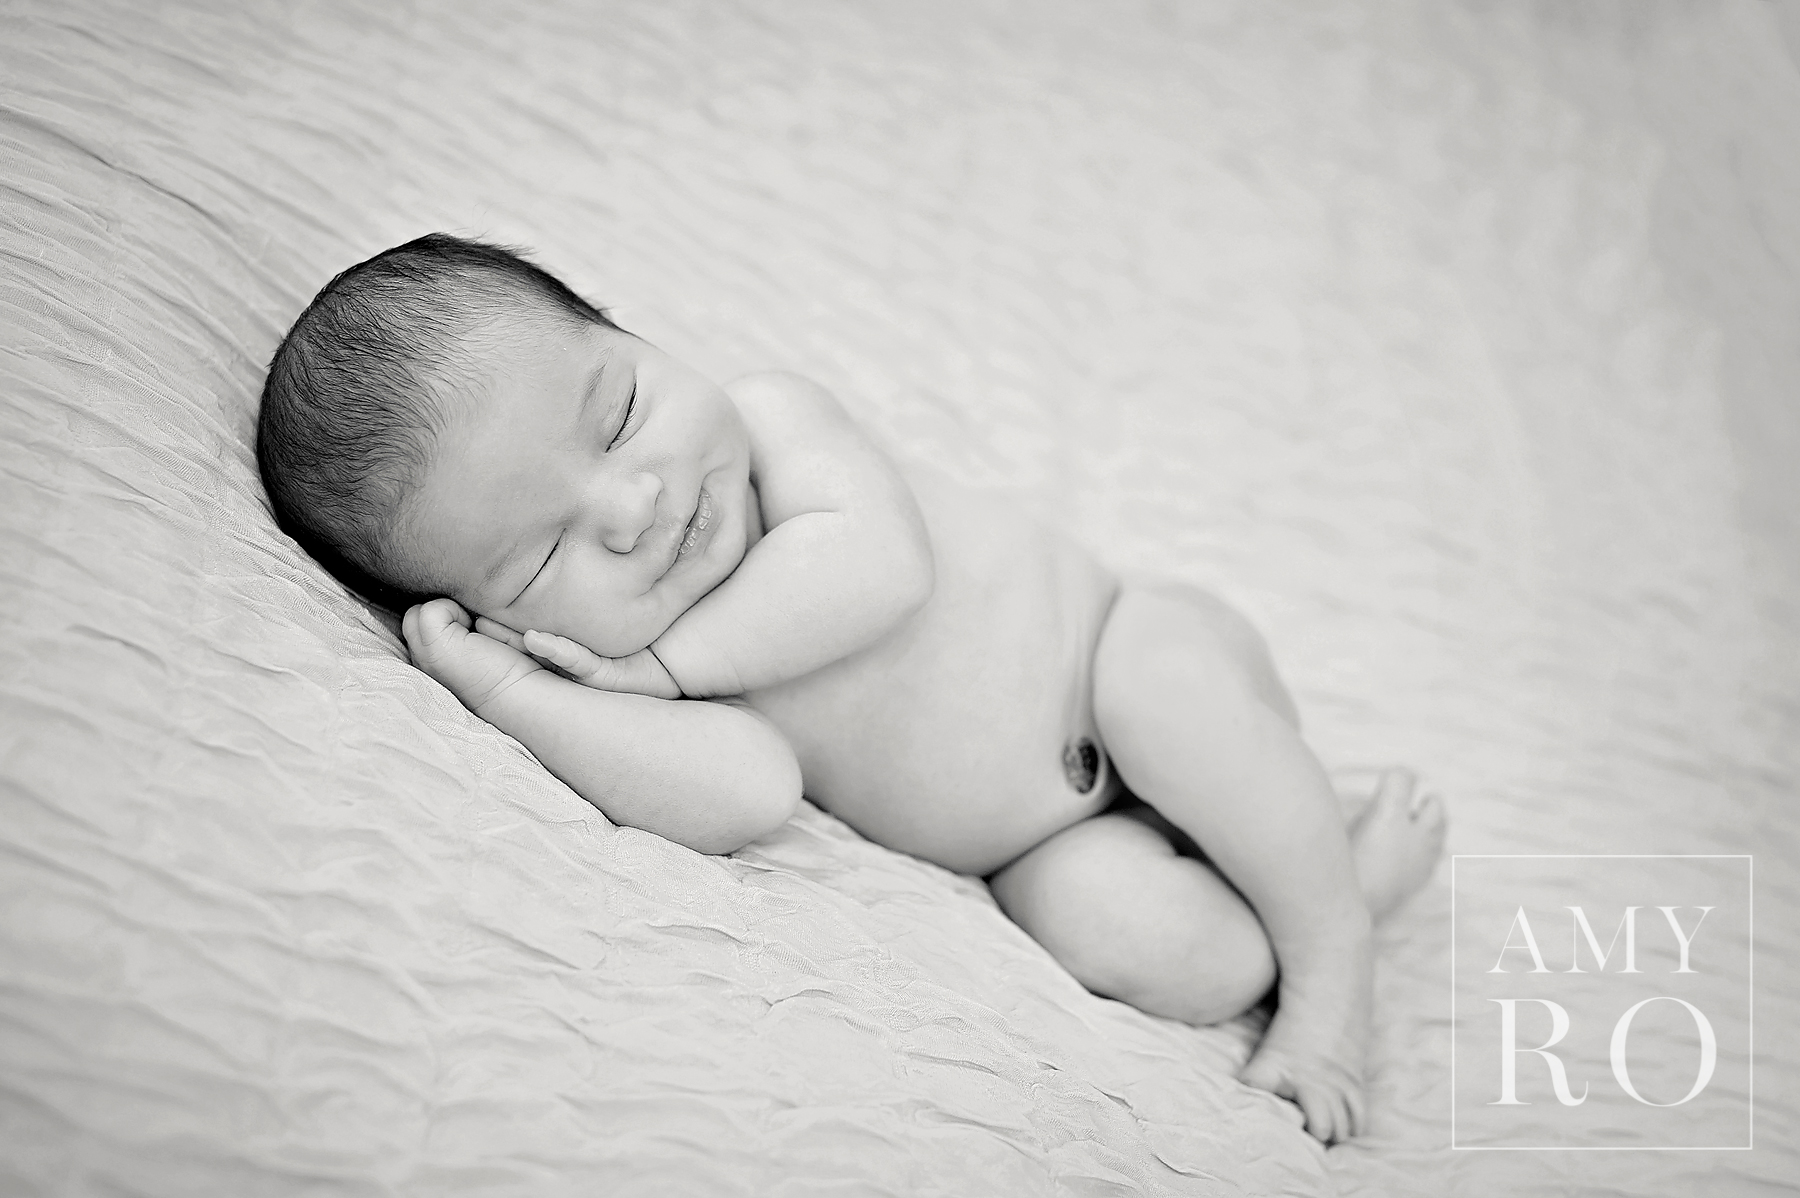 Black and white image of sleeping newborn smiling taken during newborn photography session in Rhode Island